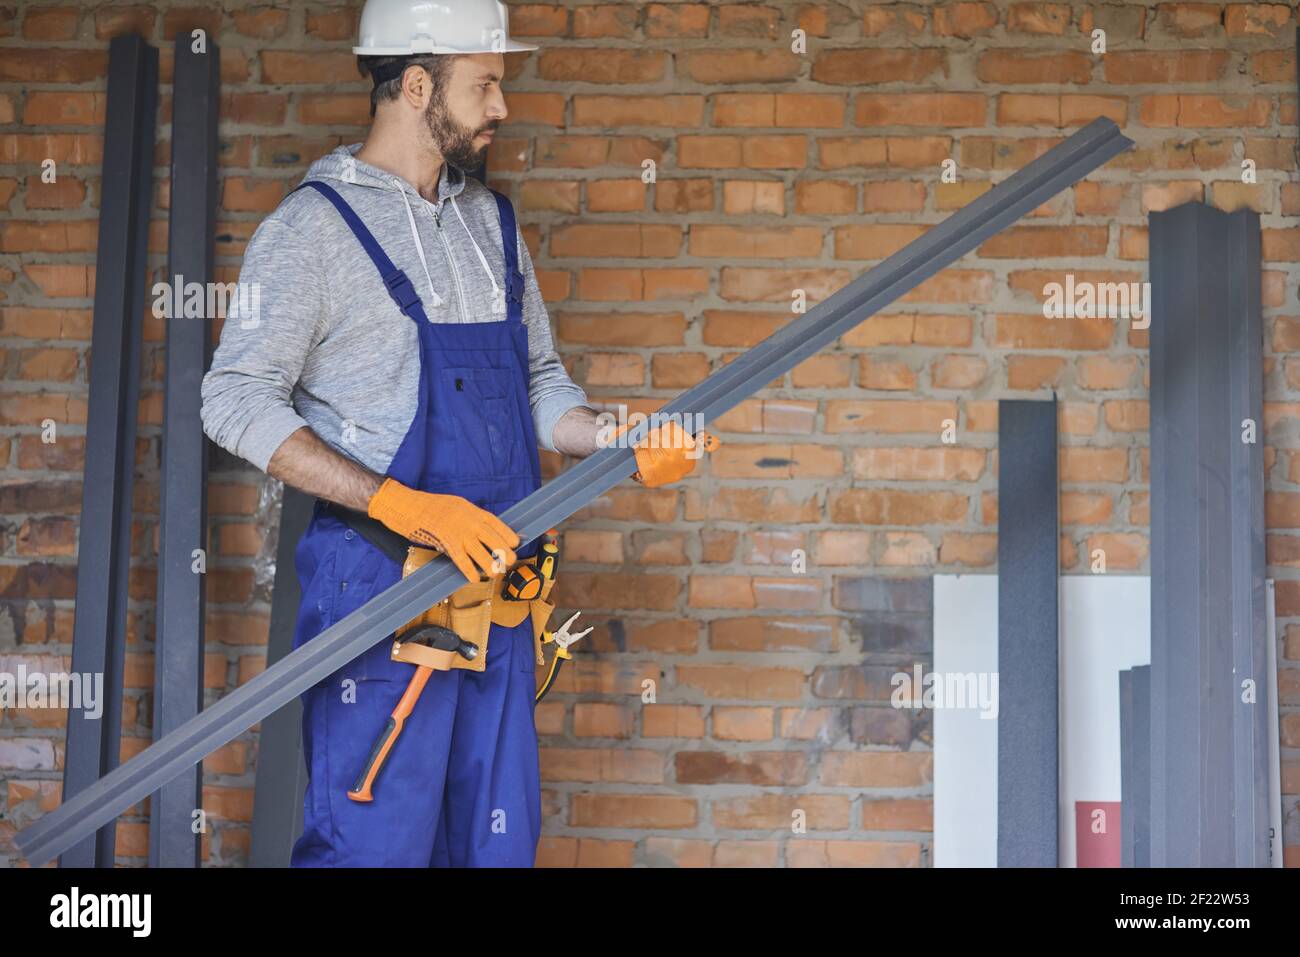 Confident male builder wearing overalls and hard hat looking focused while holding a metal stud for drywall, working on house construction. Building house, profession, safety concept Stock Photo